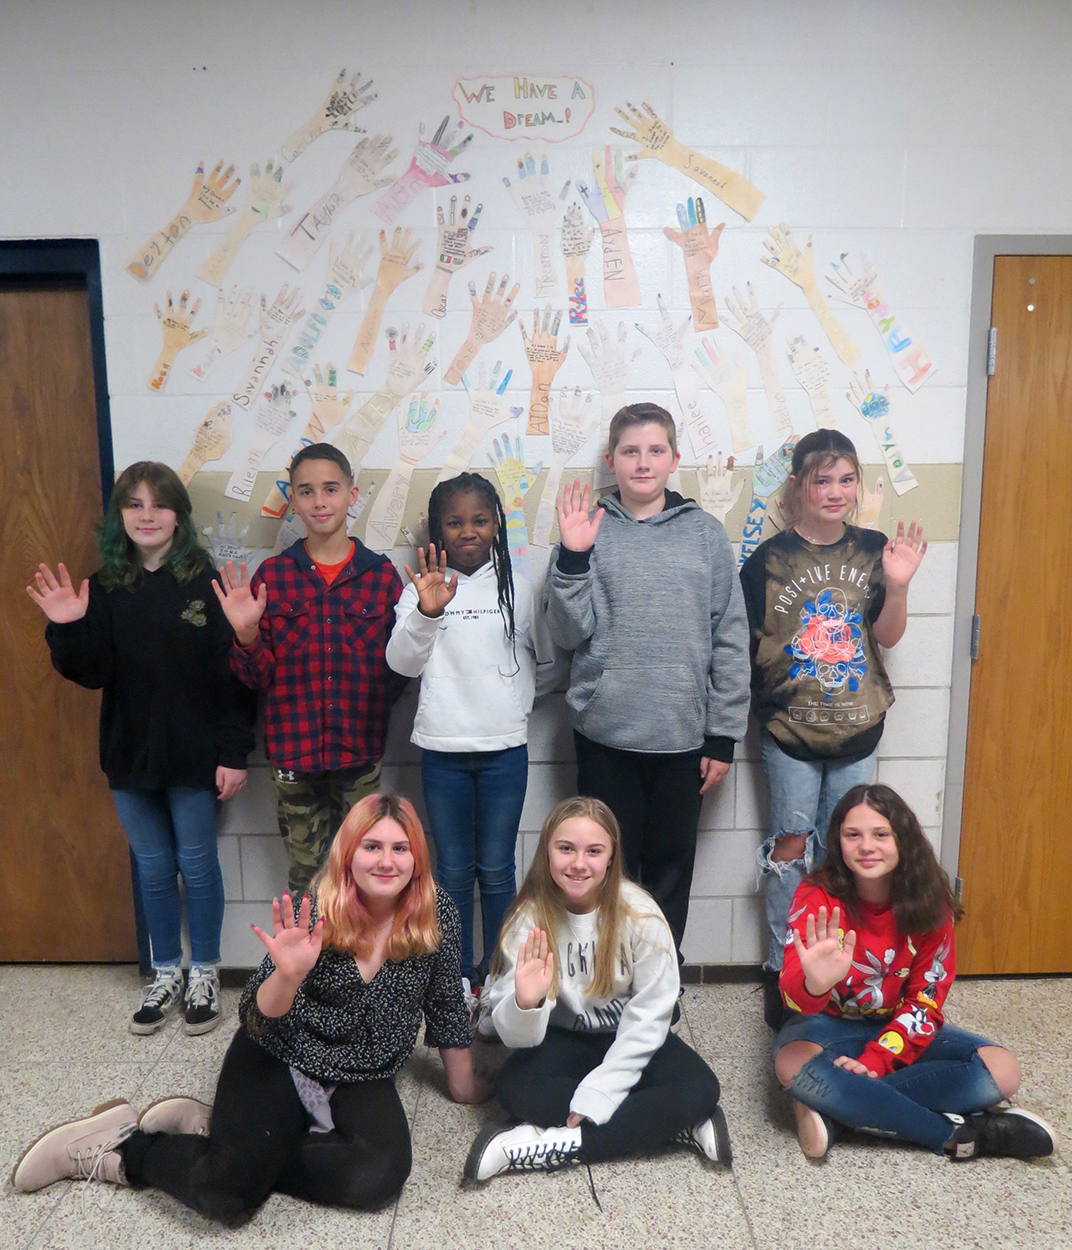 Eight of the students in front of their art.